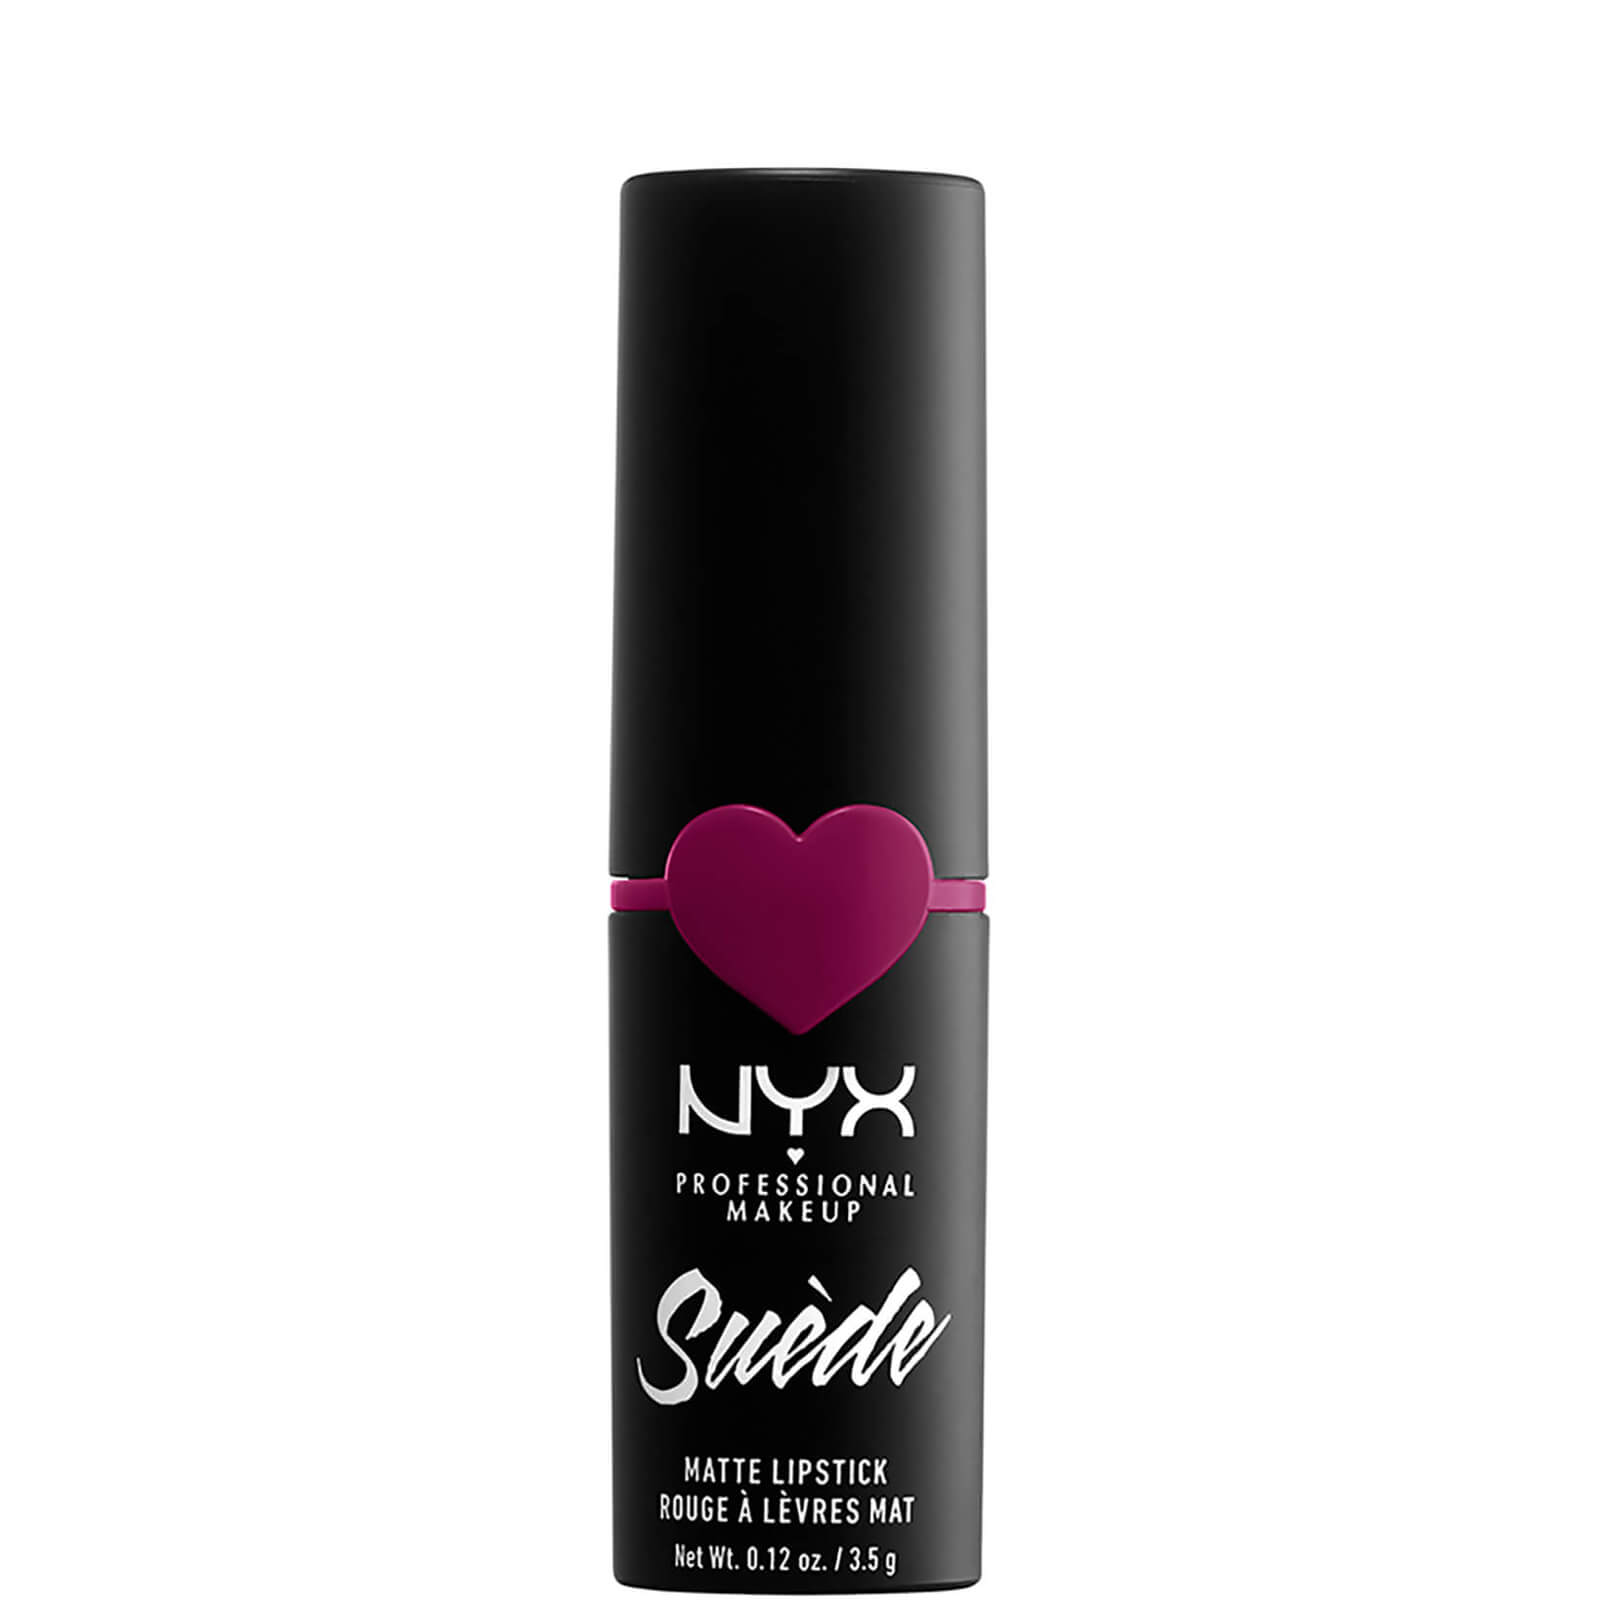 NYX Professional Makeup Suede Matte Lipstick 3.5g (Various Shades) - Sweet Tooth - Fuschia